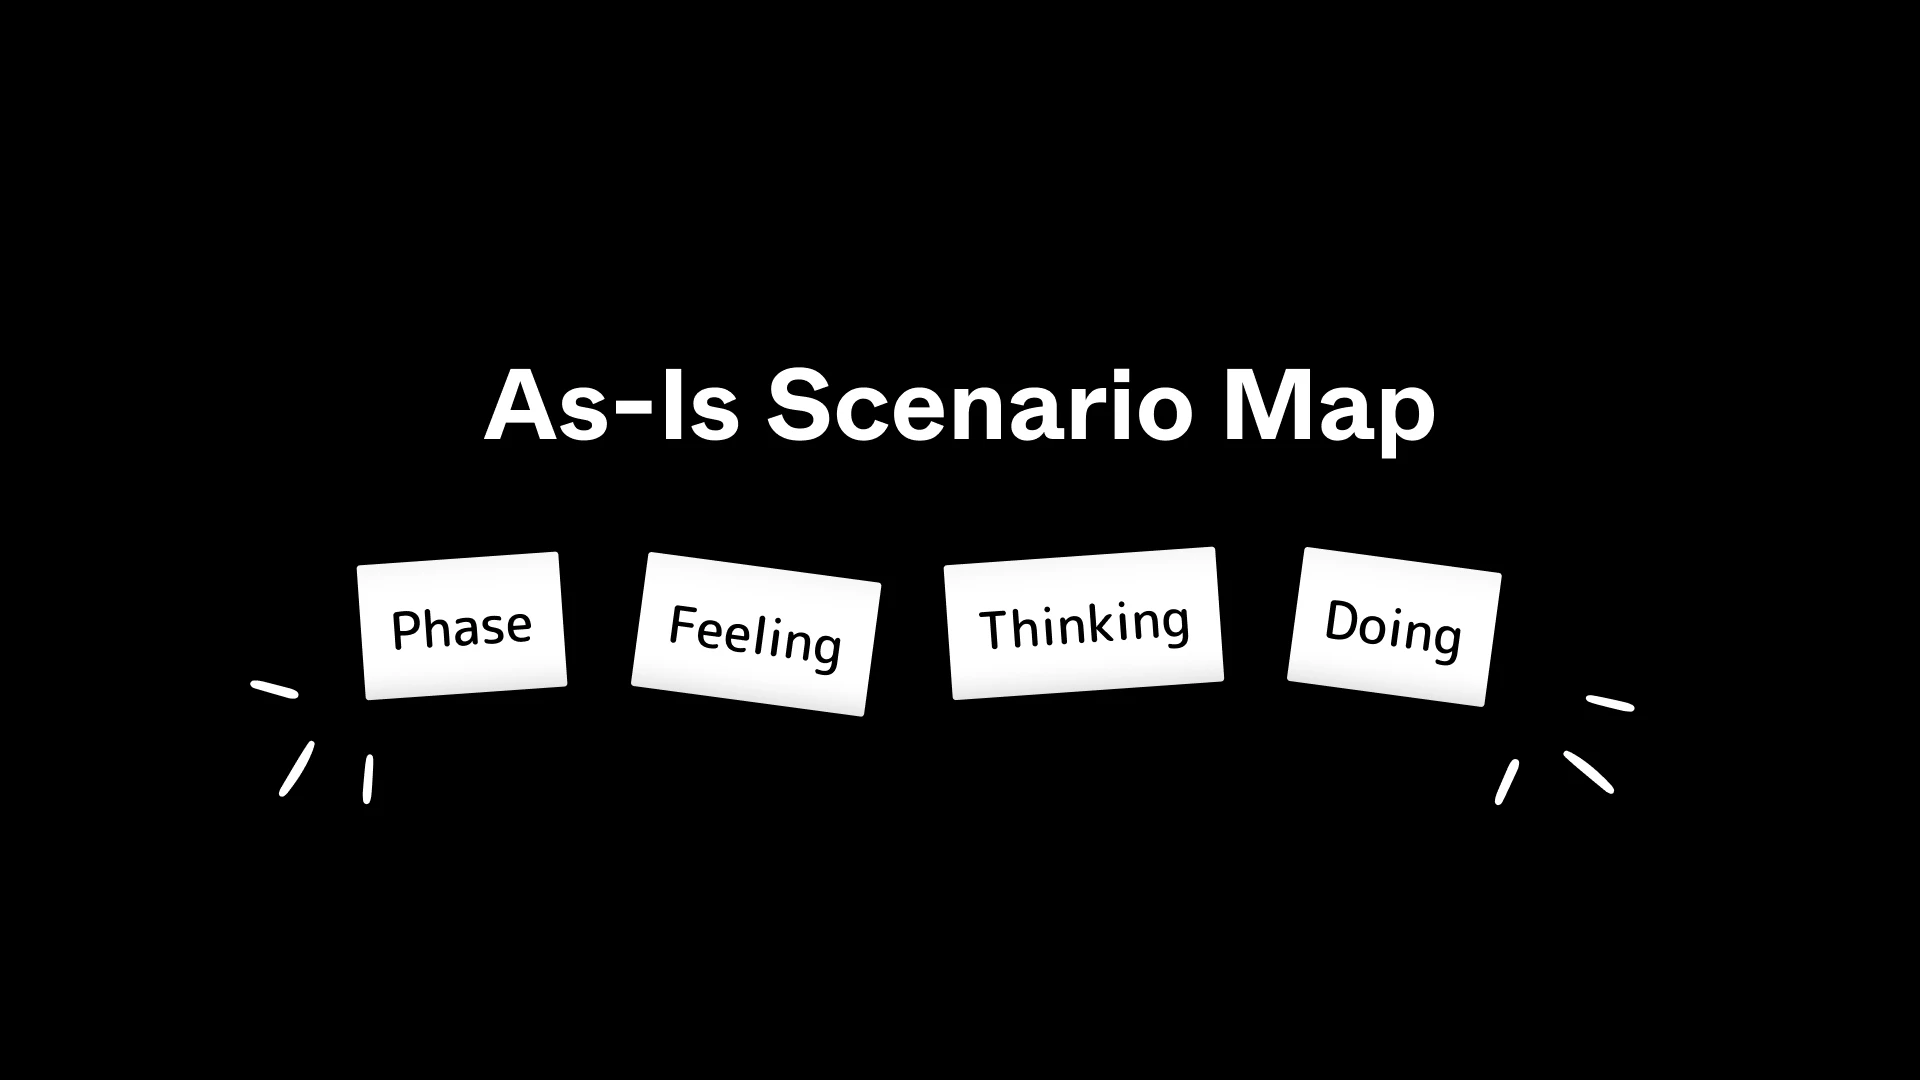 As-is Scenario Map for Figma and Adobe XD